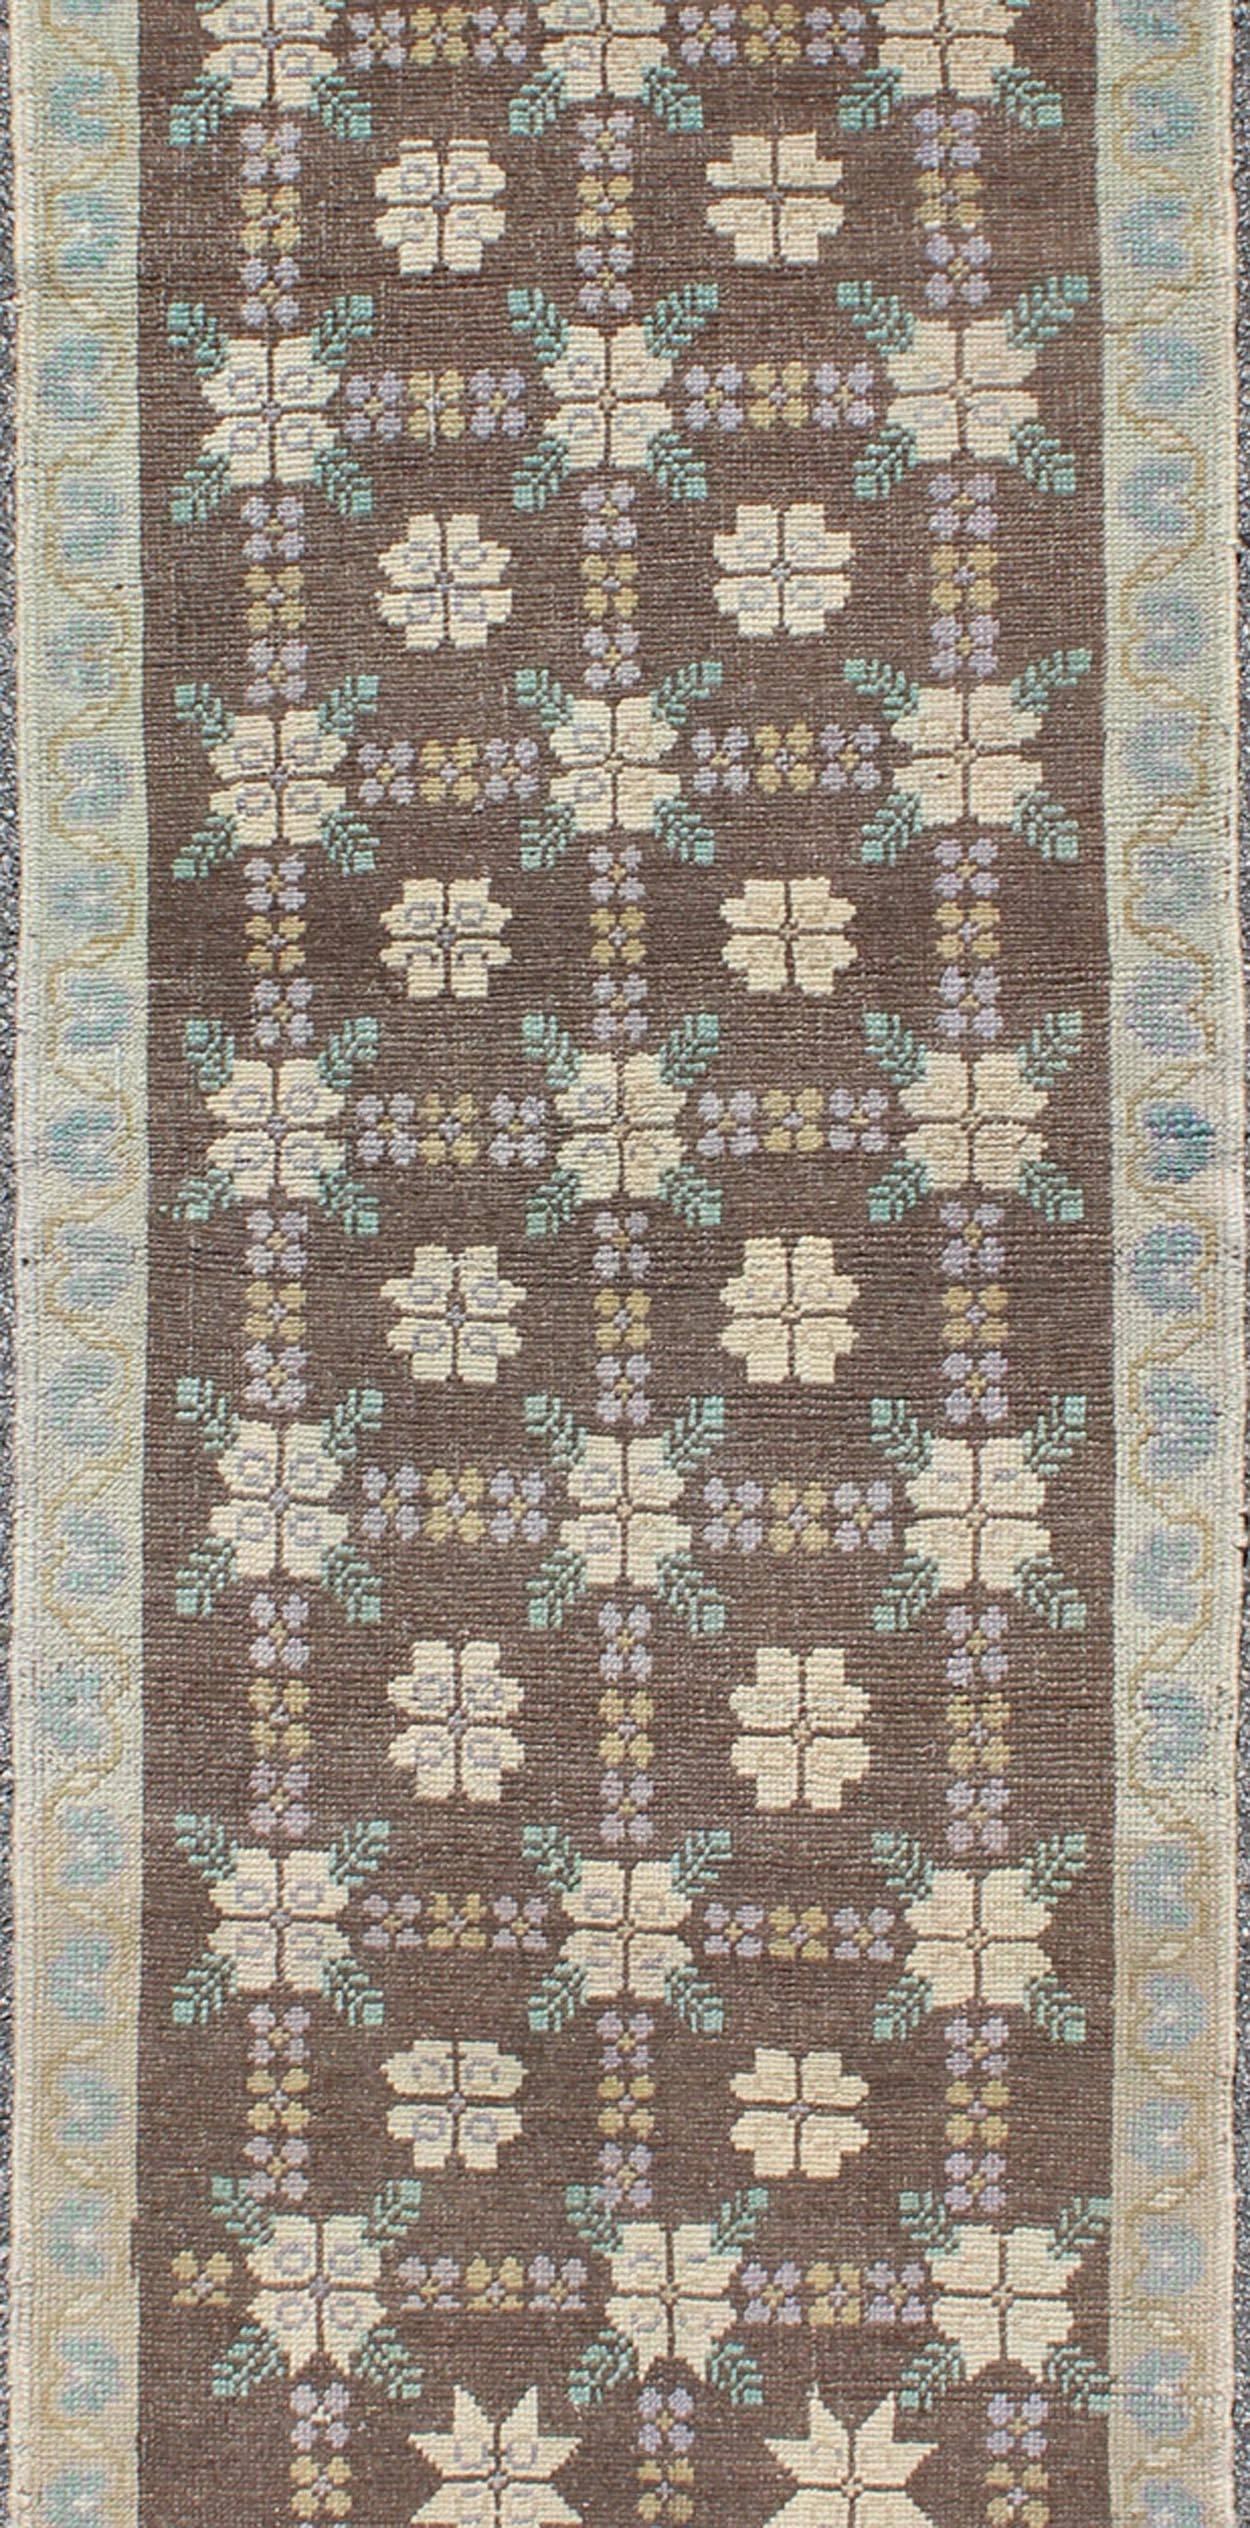 Hand-Knotted Vintage Turkish Oushak Runner with Gray and Cream Flower Latticework Design